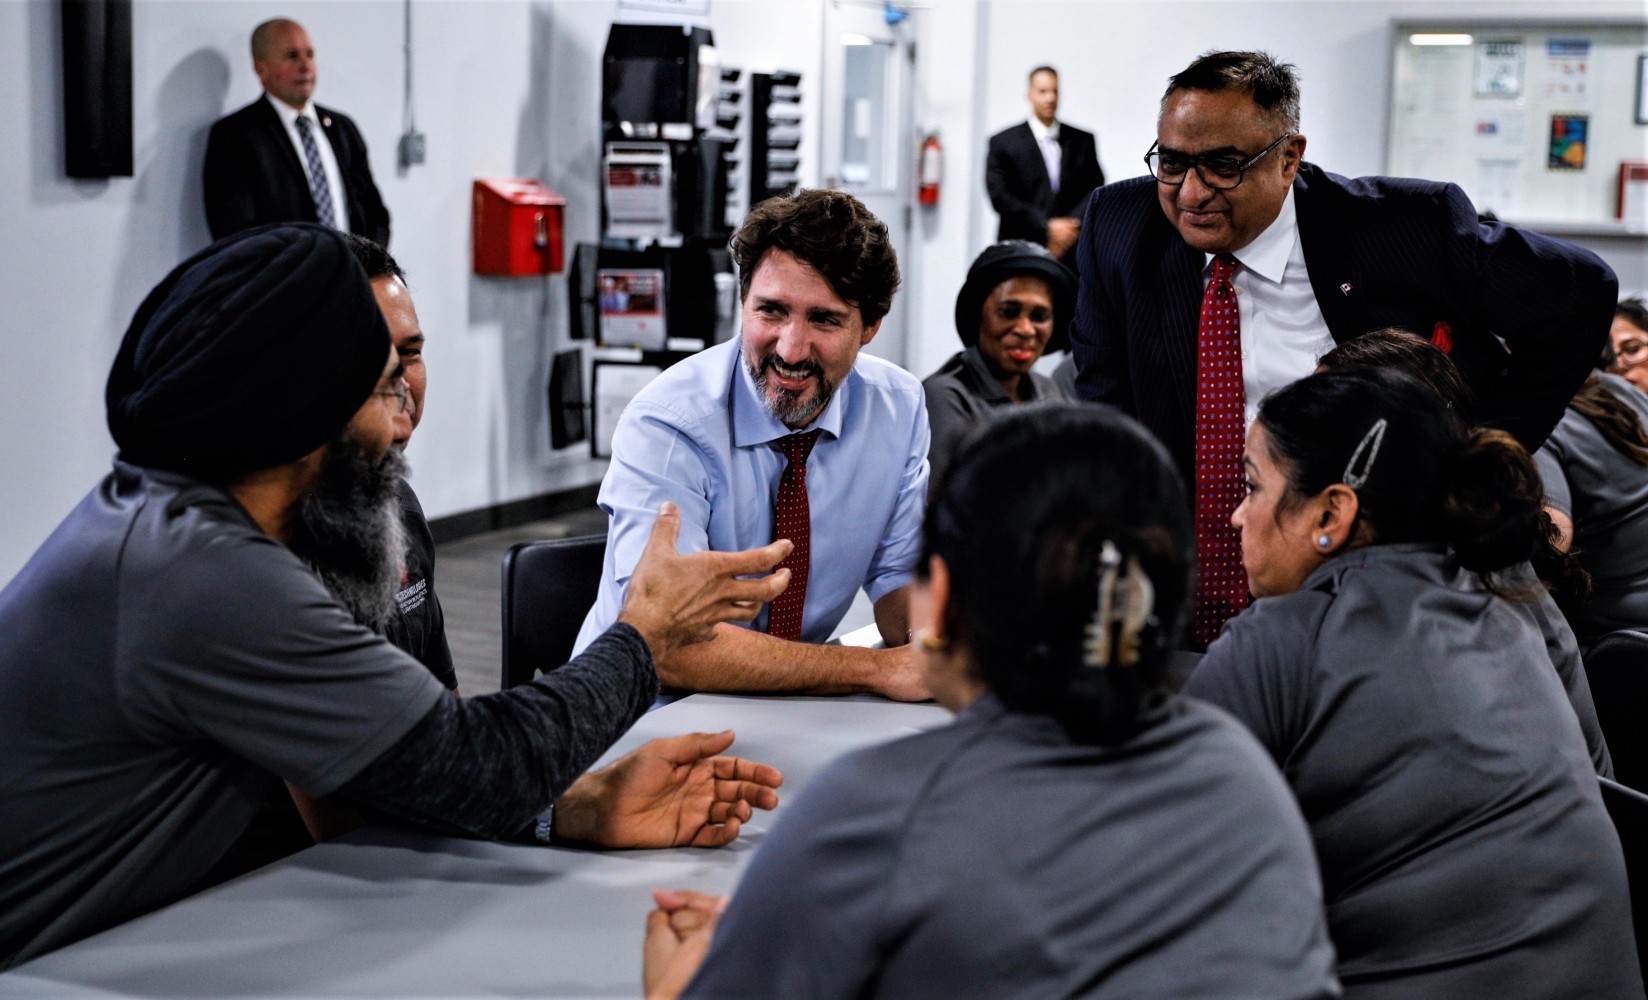 Trudeau lifts spirits of Brampton’s beleaguered auto sector workers